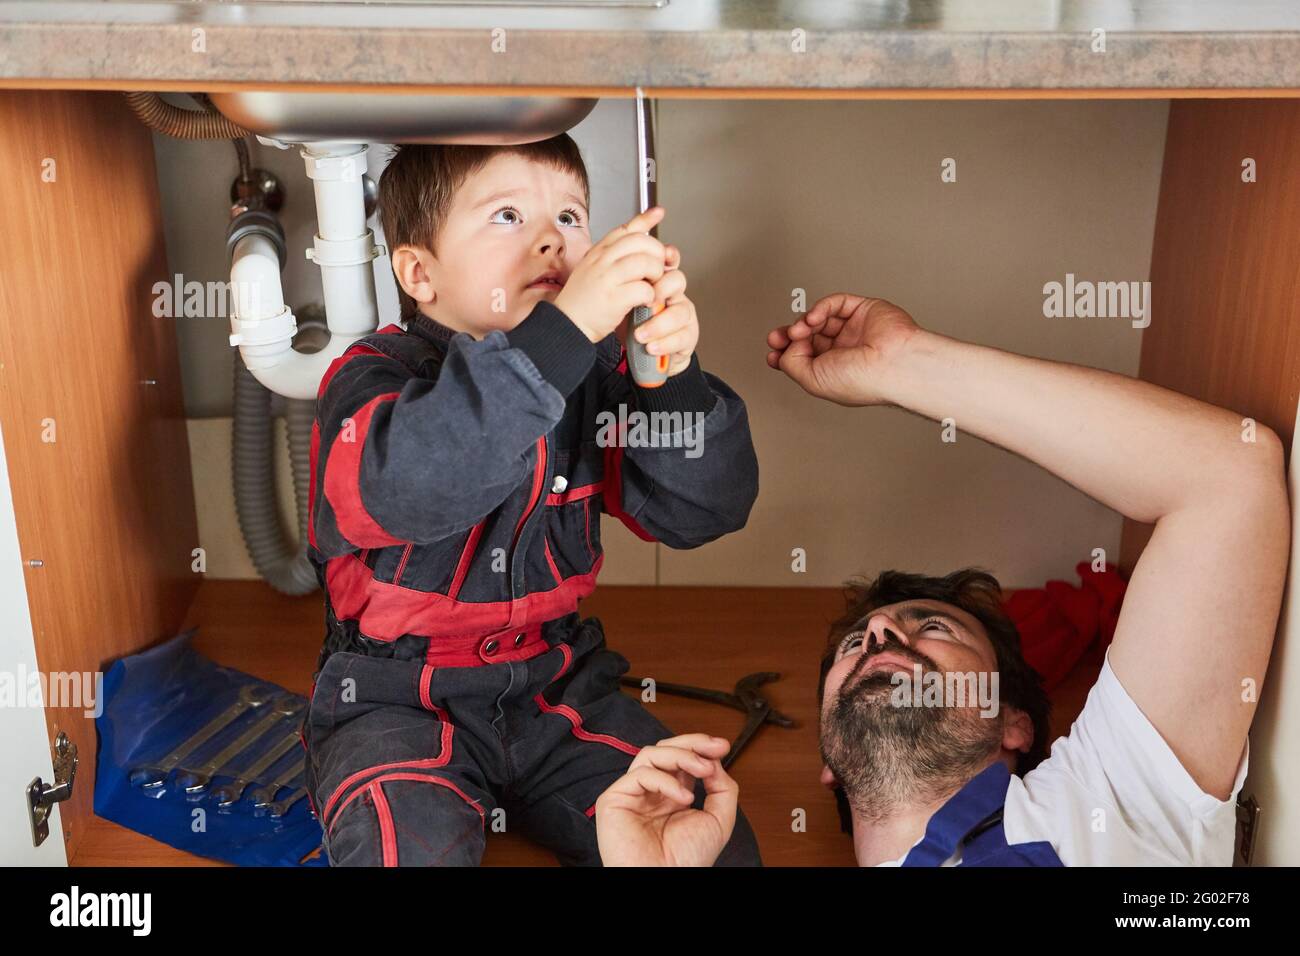 Handyman child helps his father install or repair a sink Stock Photo